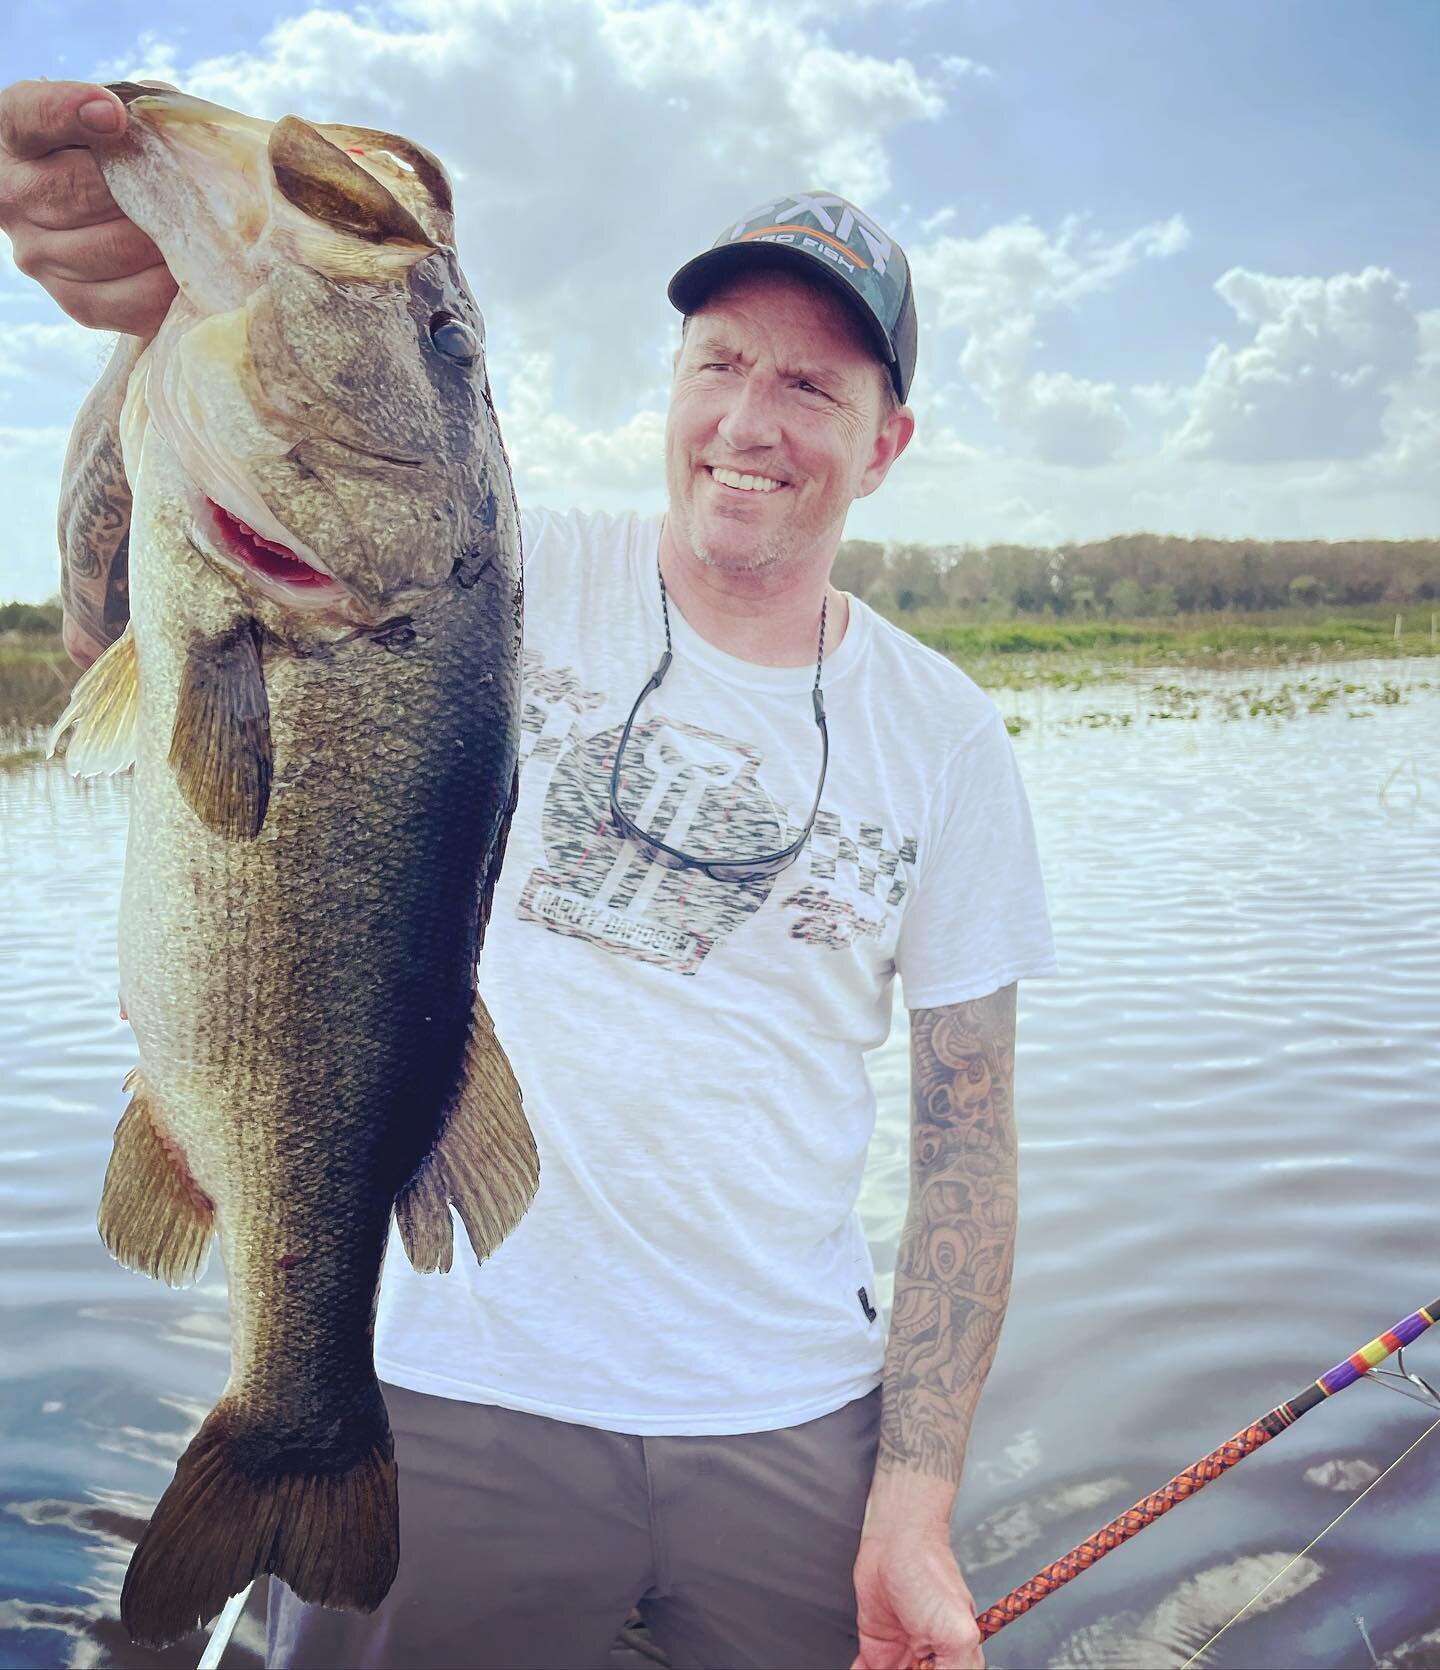 Want to book a trip? Click the link below 🙂 🙂 🙂

https://www.davidpaycheckfishing.com/bookatrip

Come make memories like these to Last a LIFETIME! 

Call or Text David Paycheck Fishing Guide Service! And let&rsquo;s go get you some fish you&rsquo;